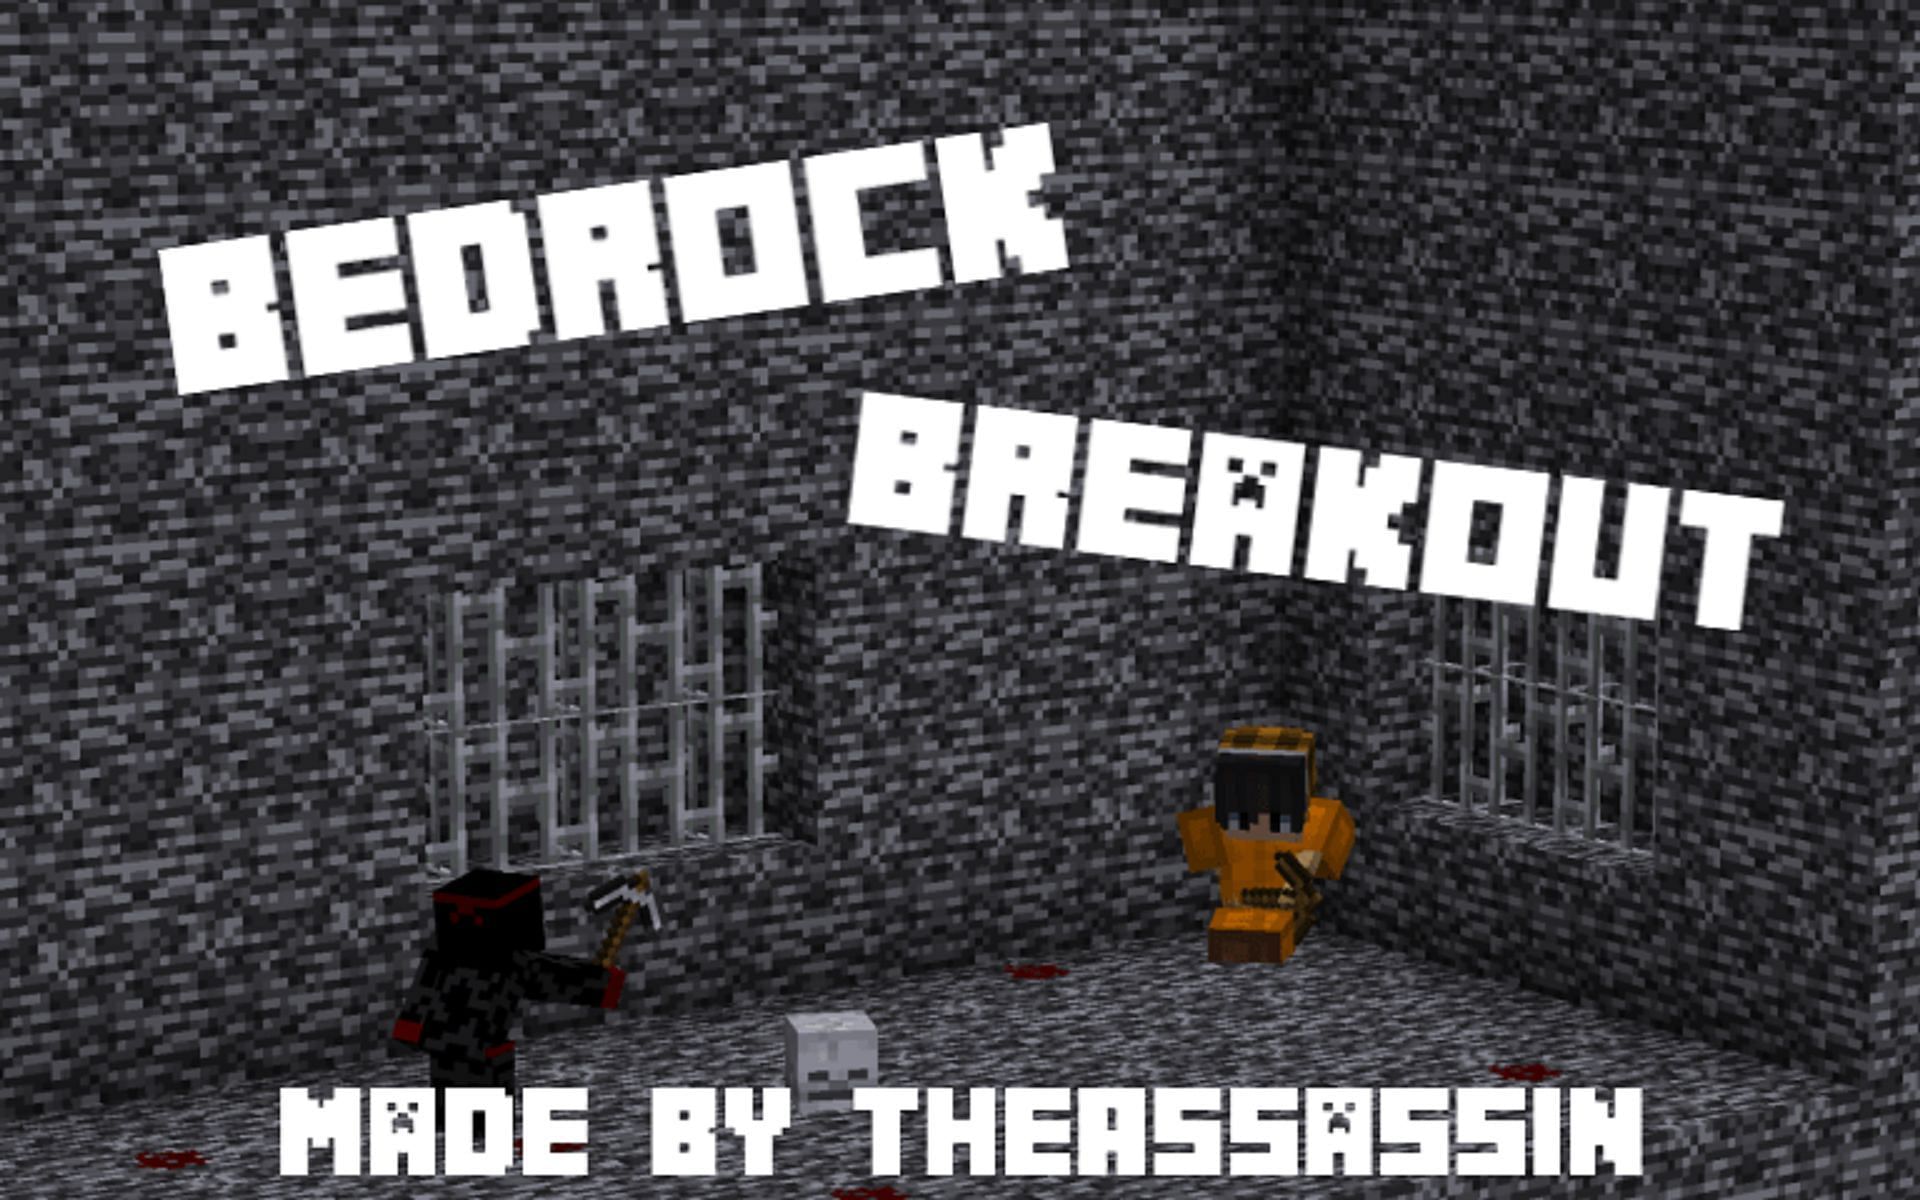 Bedrock Breakout should present a particularly difficult challenge to players (Image via TheAssassin/MinecraftMaps.com)